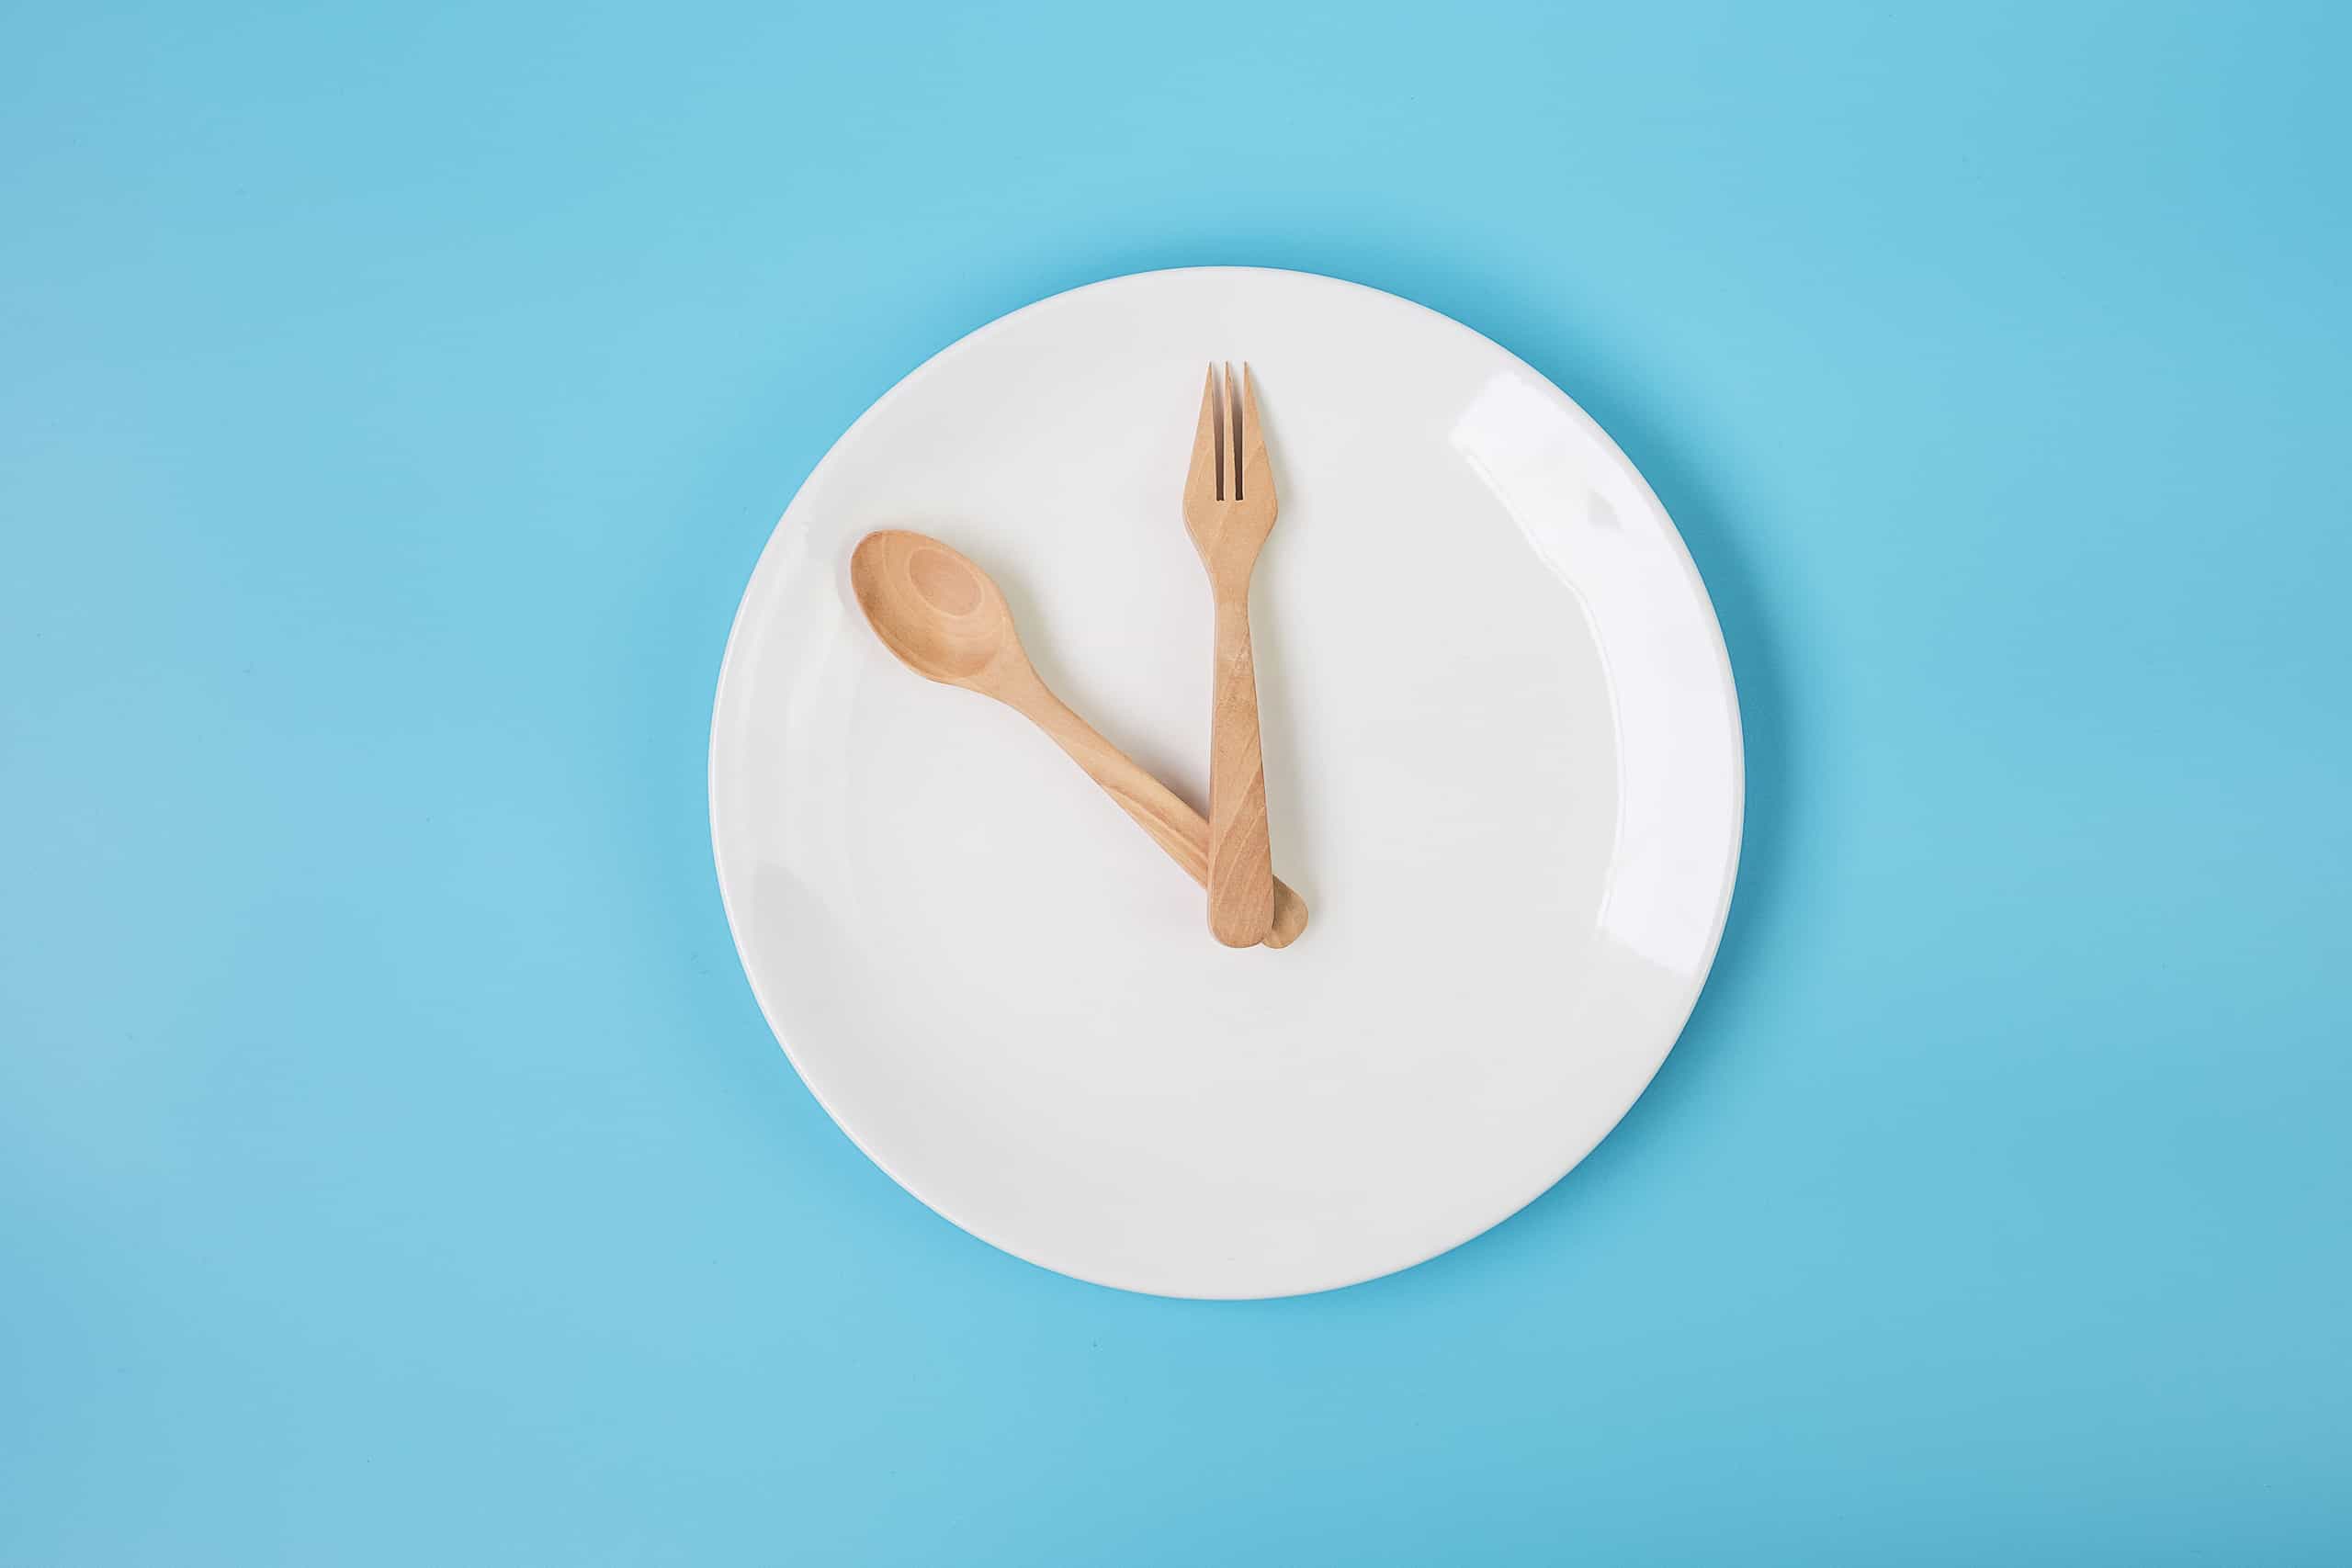 Fasting Your Way to a Healthier, Pain-Free Back